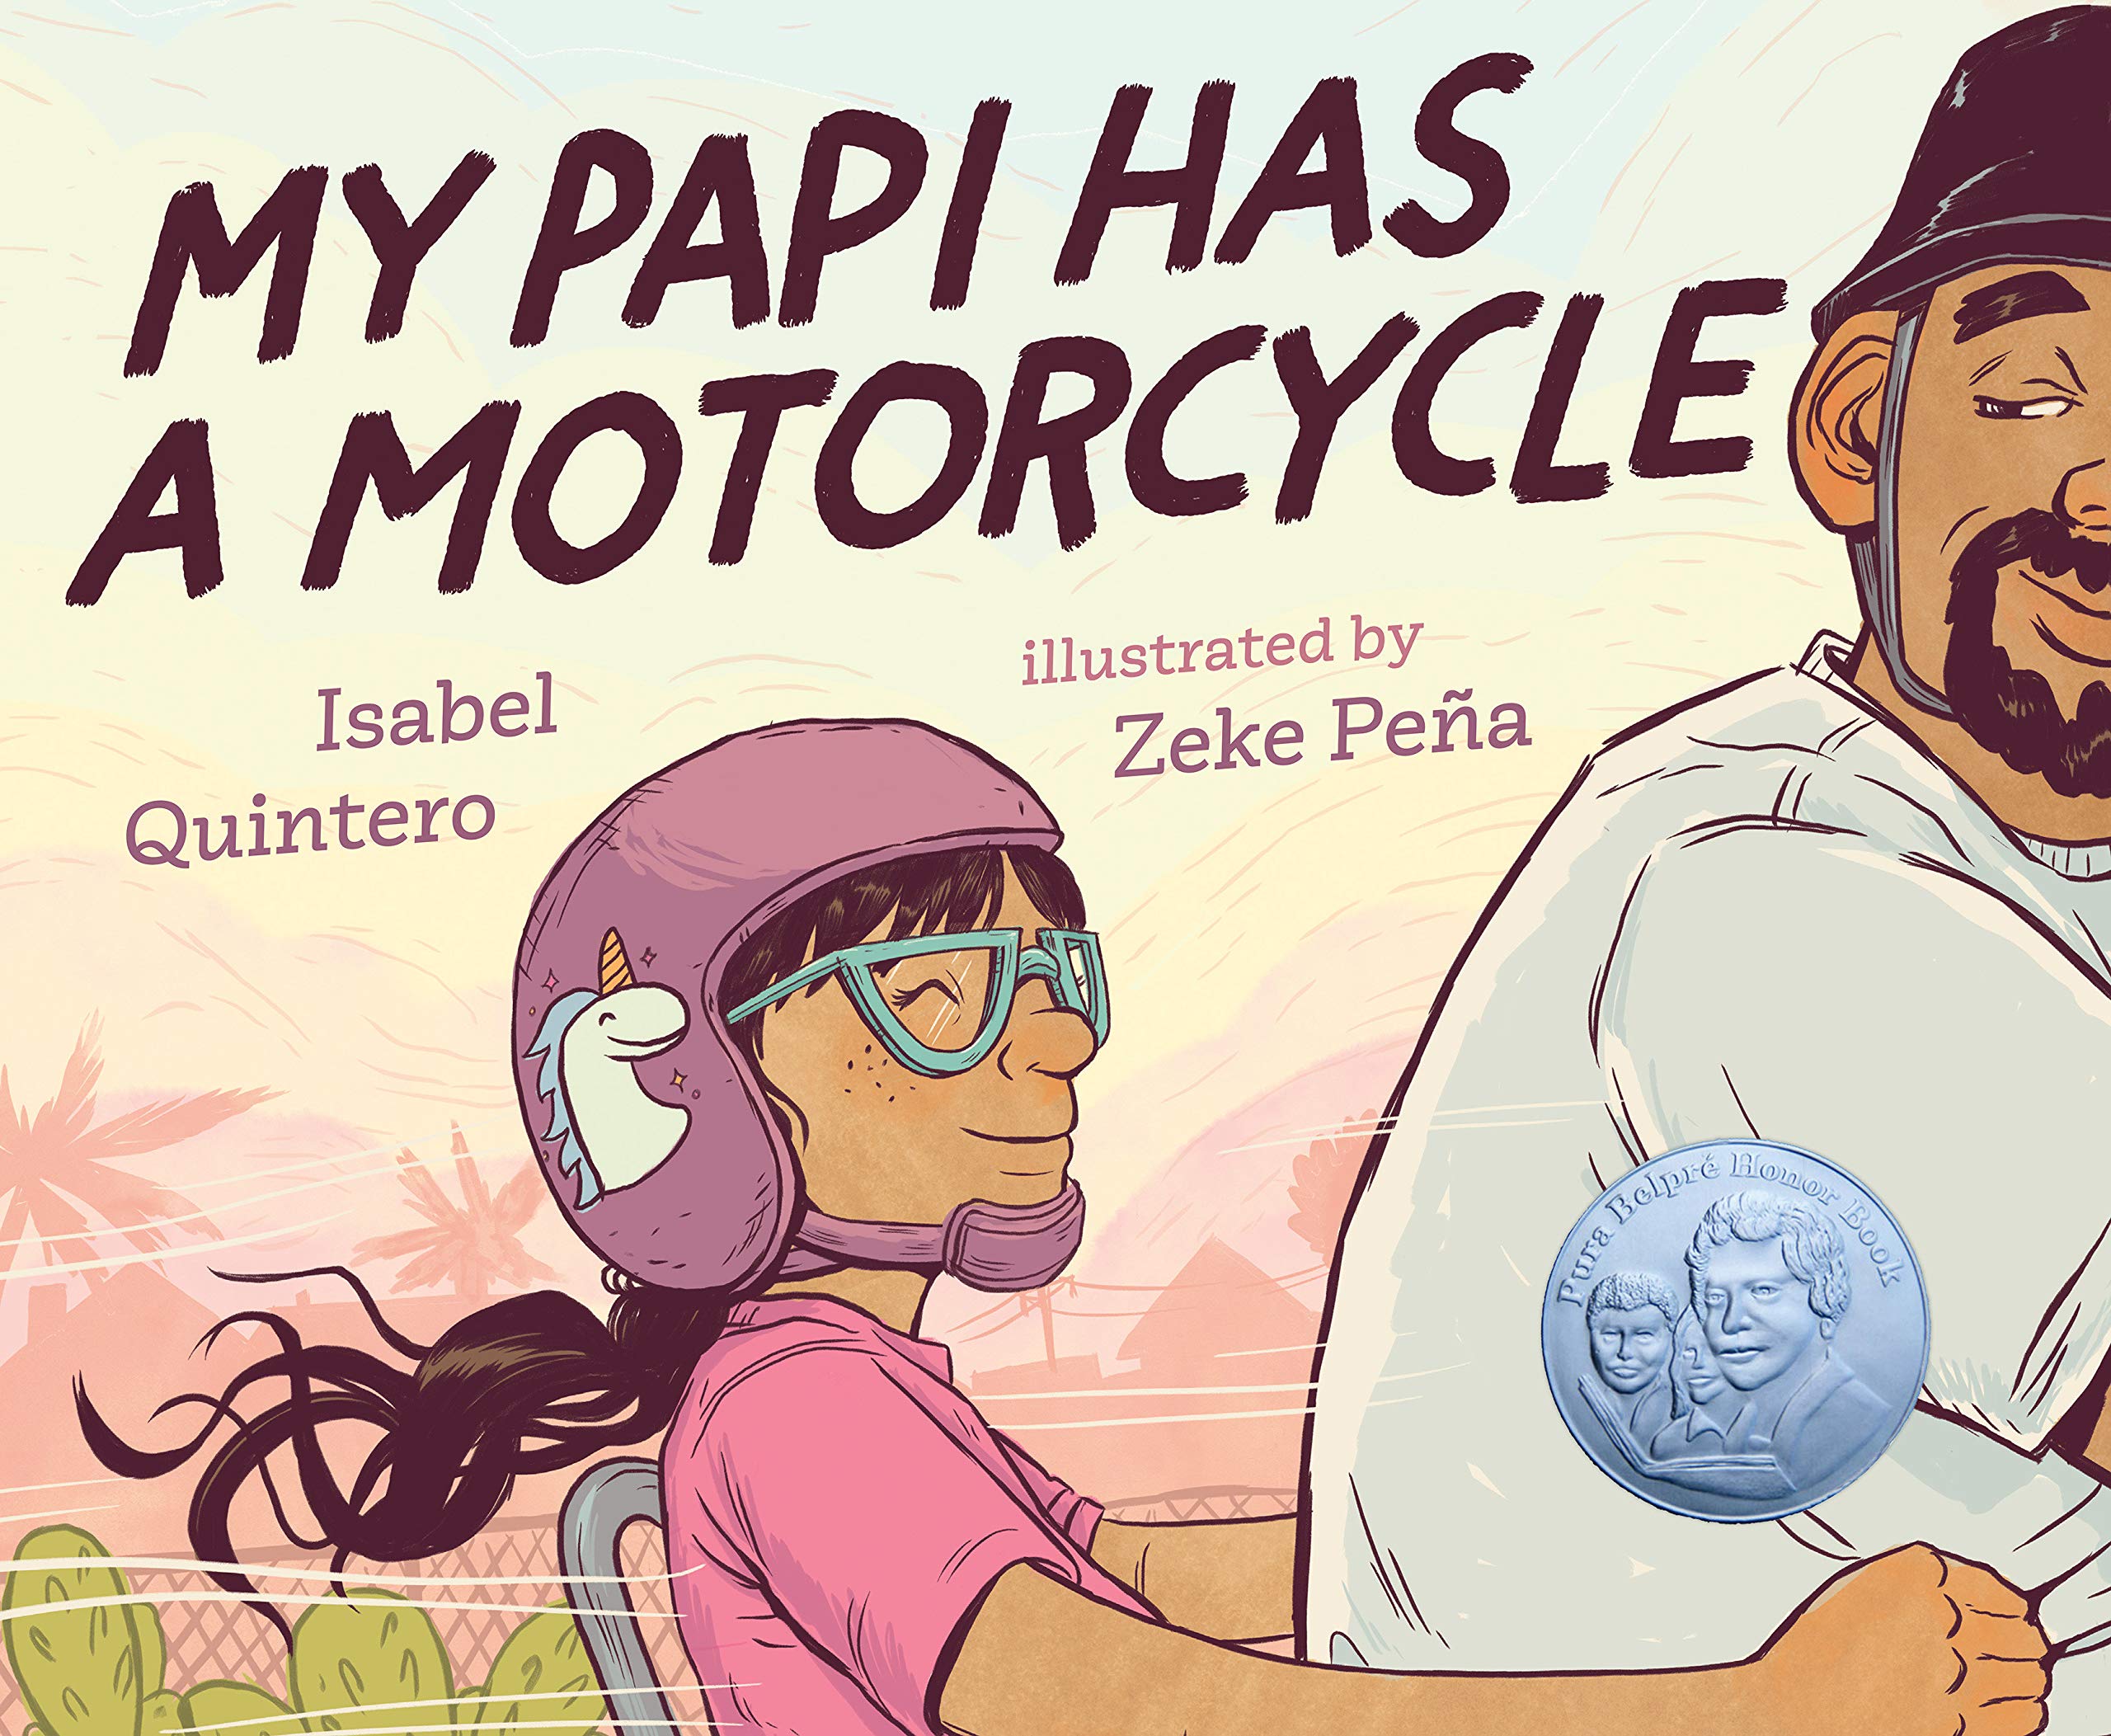 My Papi Has a Motorcycle by Isabel Quintero book cover